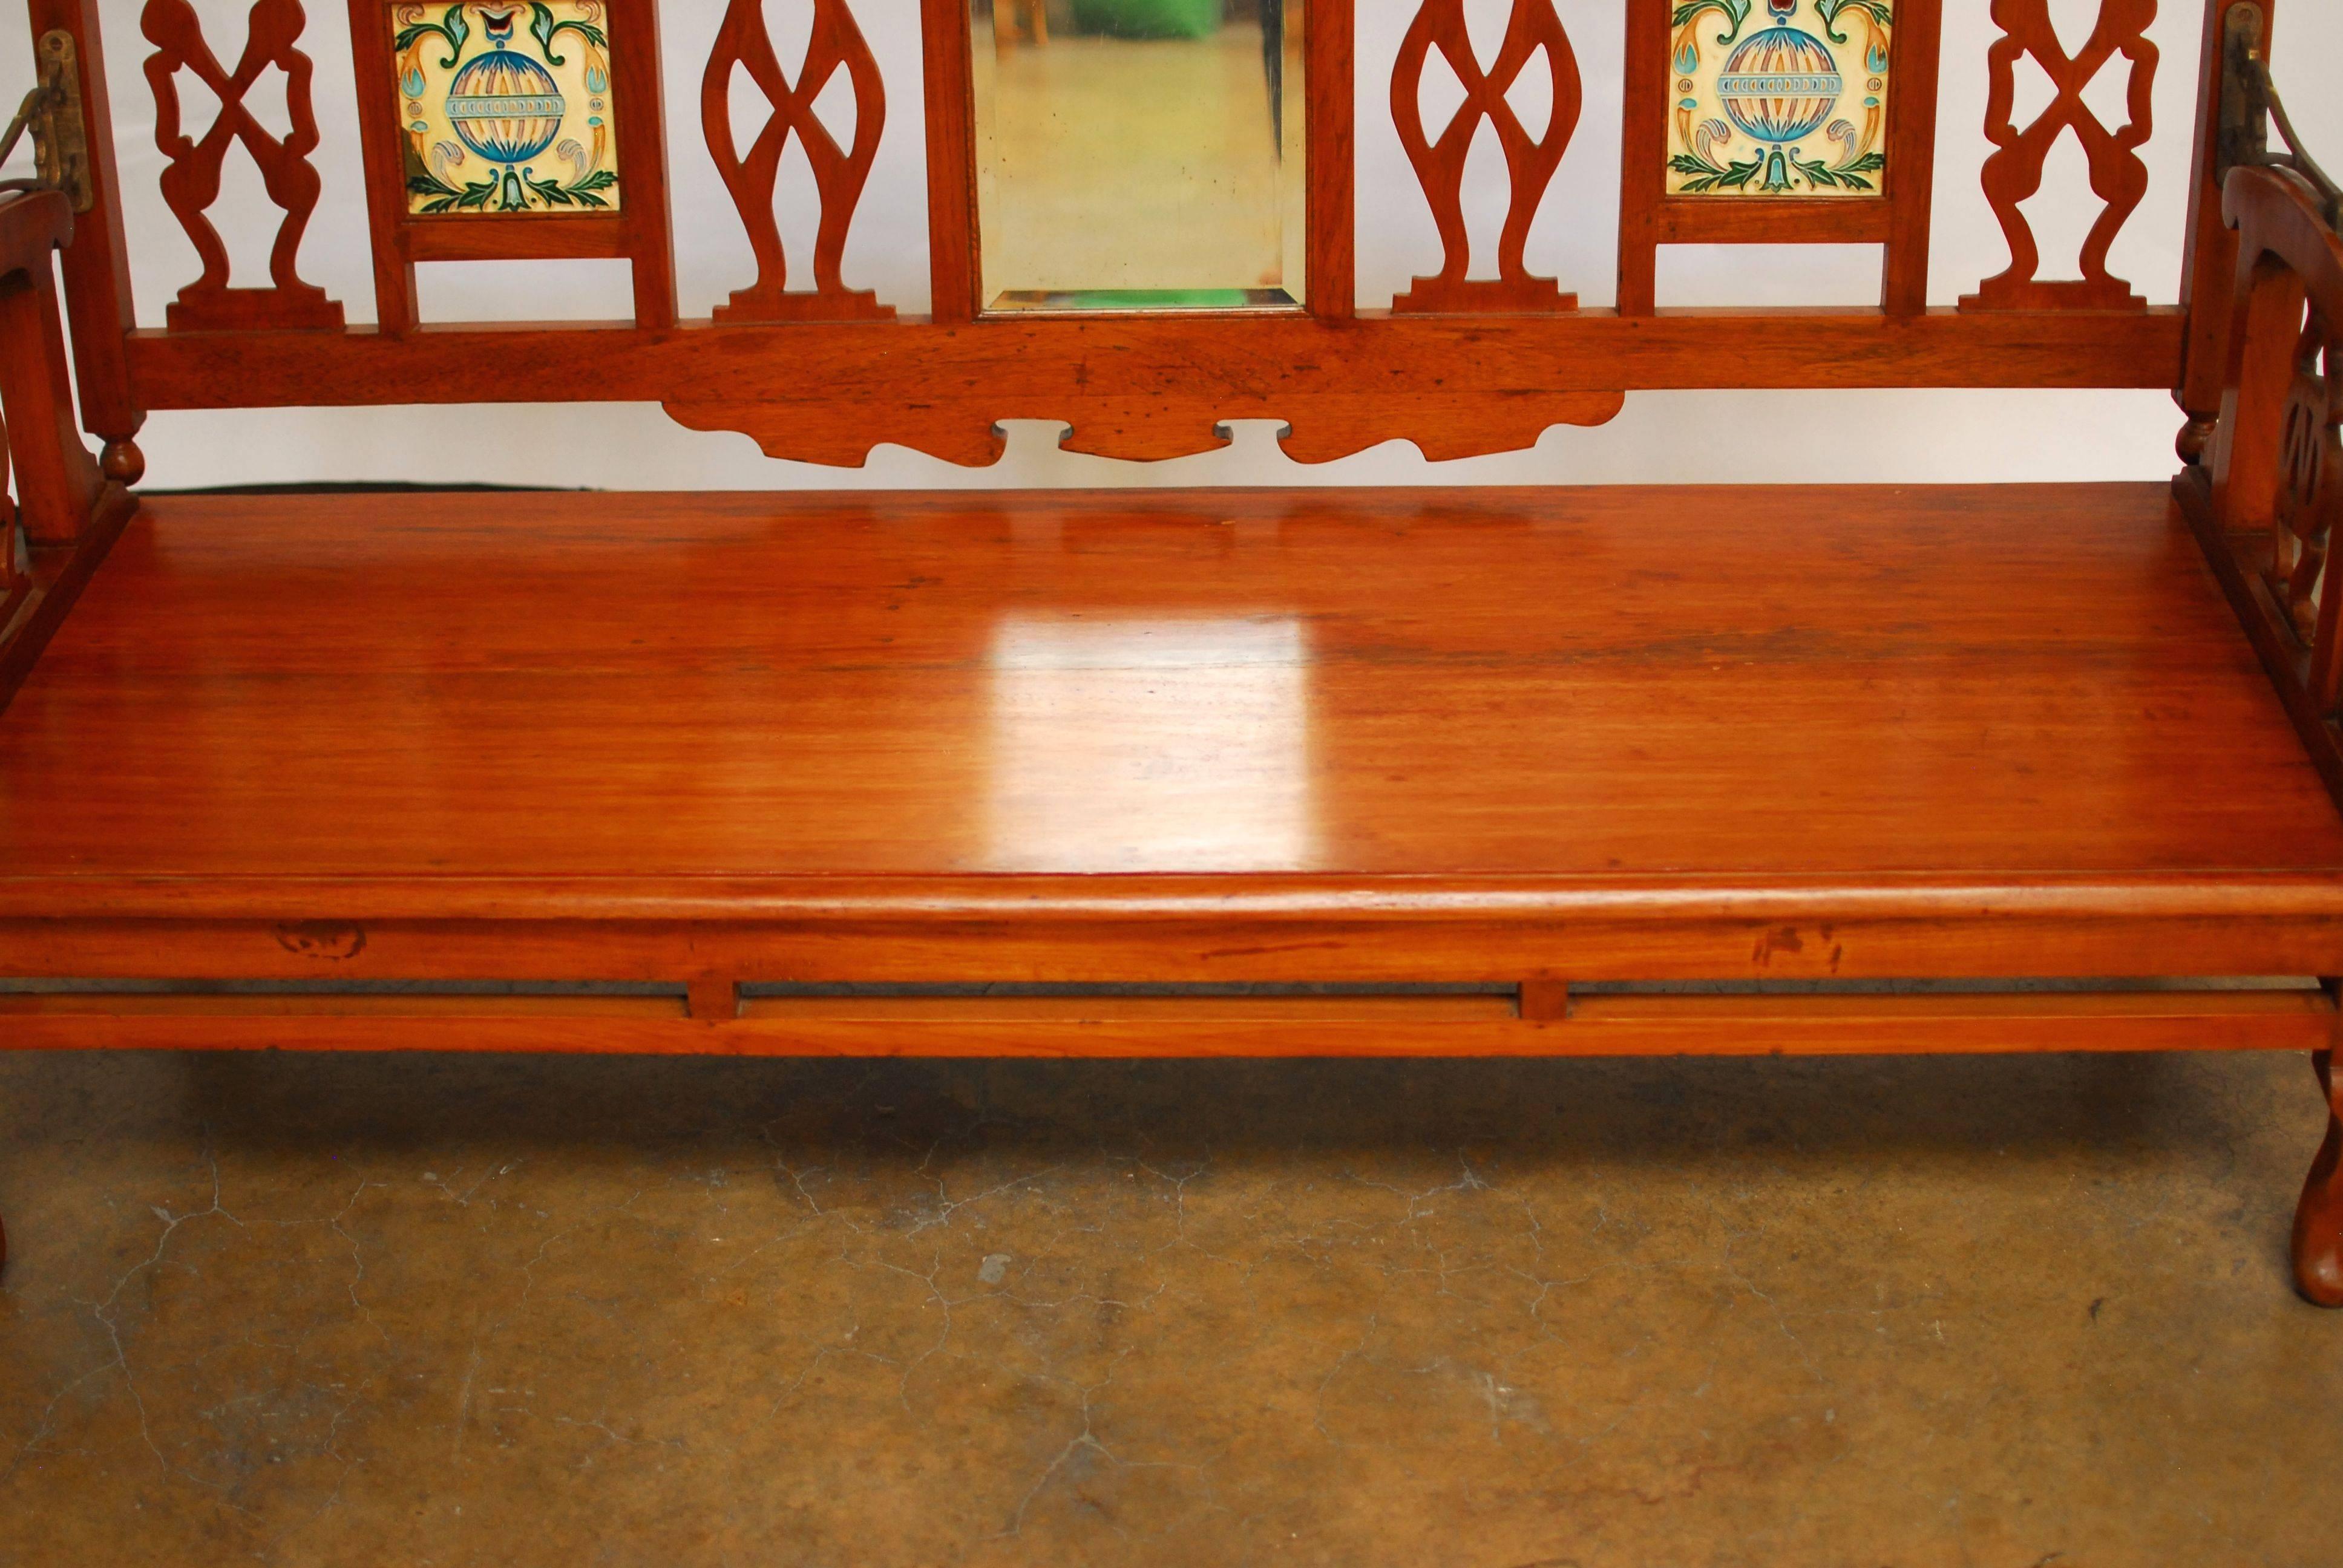 Impressive British Colonial swing back bench made entirely of hand-carved teakwood featuring a rotating back to expose sunrise or sunset orientation. The bench has its original hooks on all four corners for hanging. The backrest features Hindu style